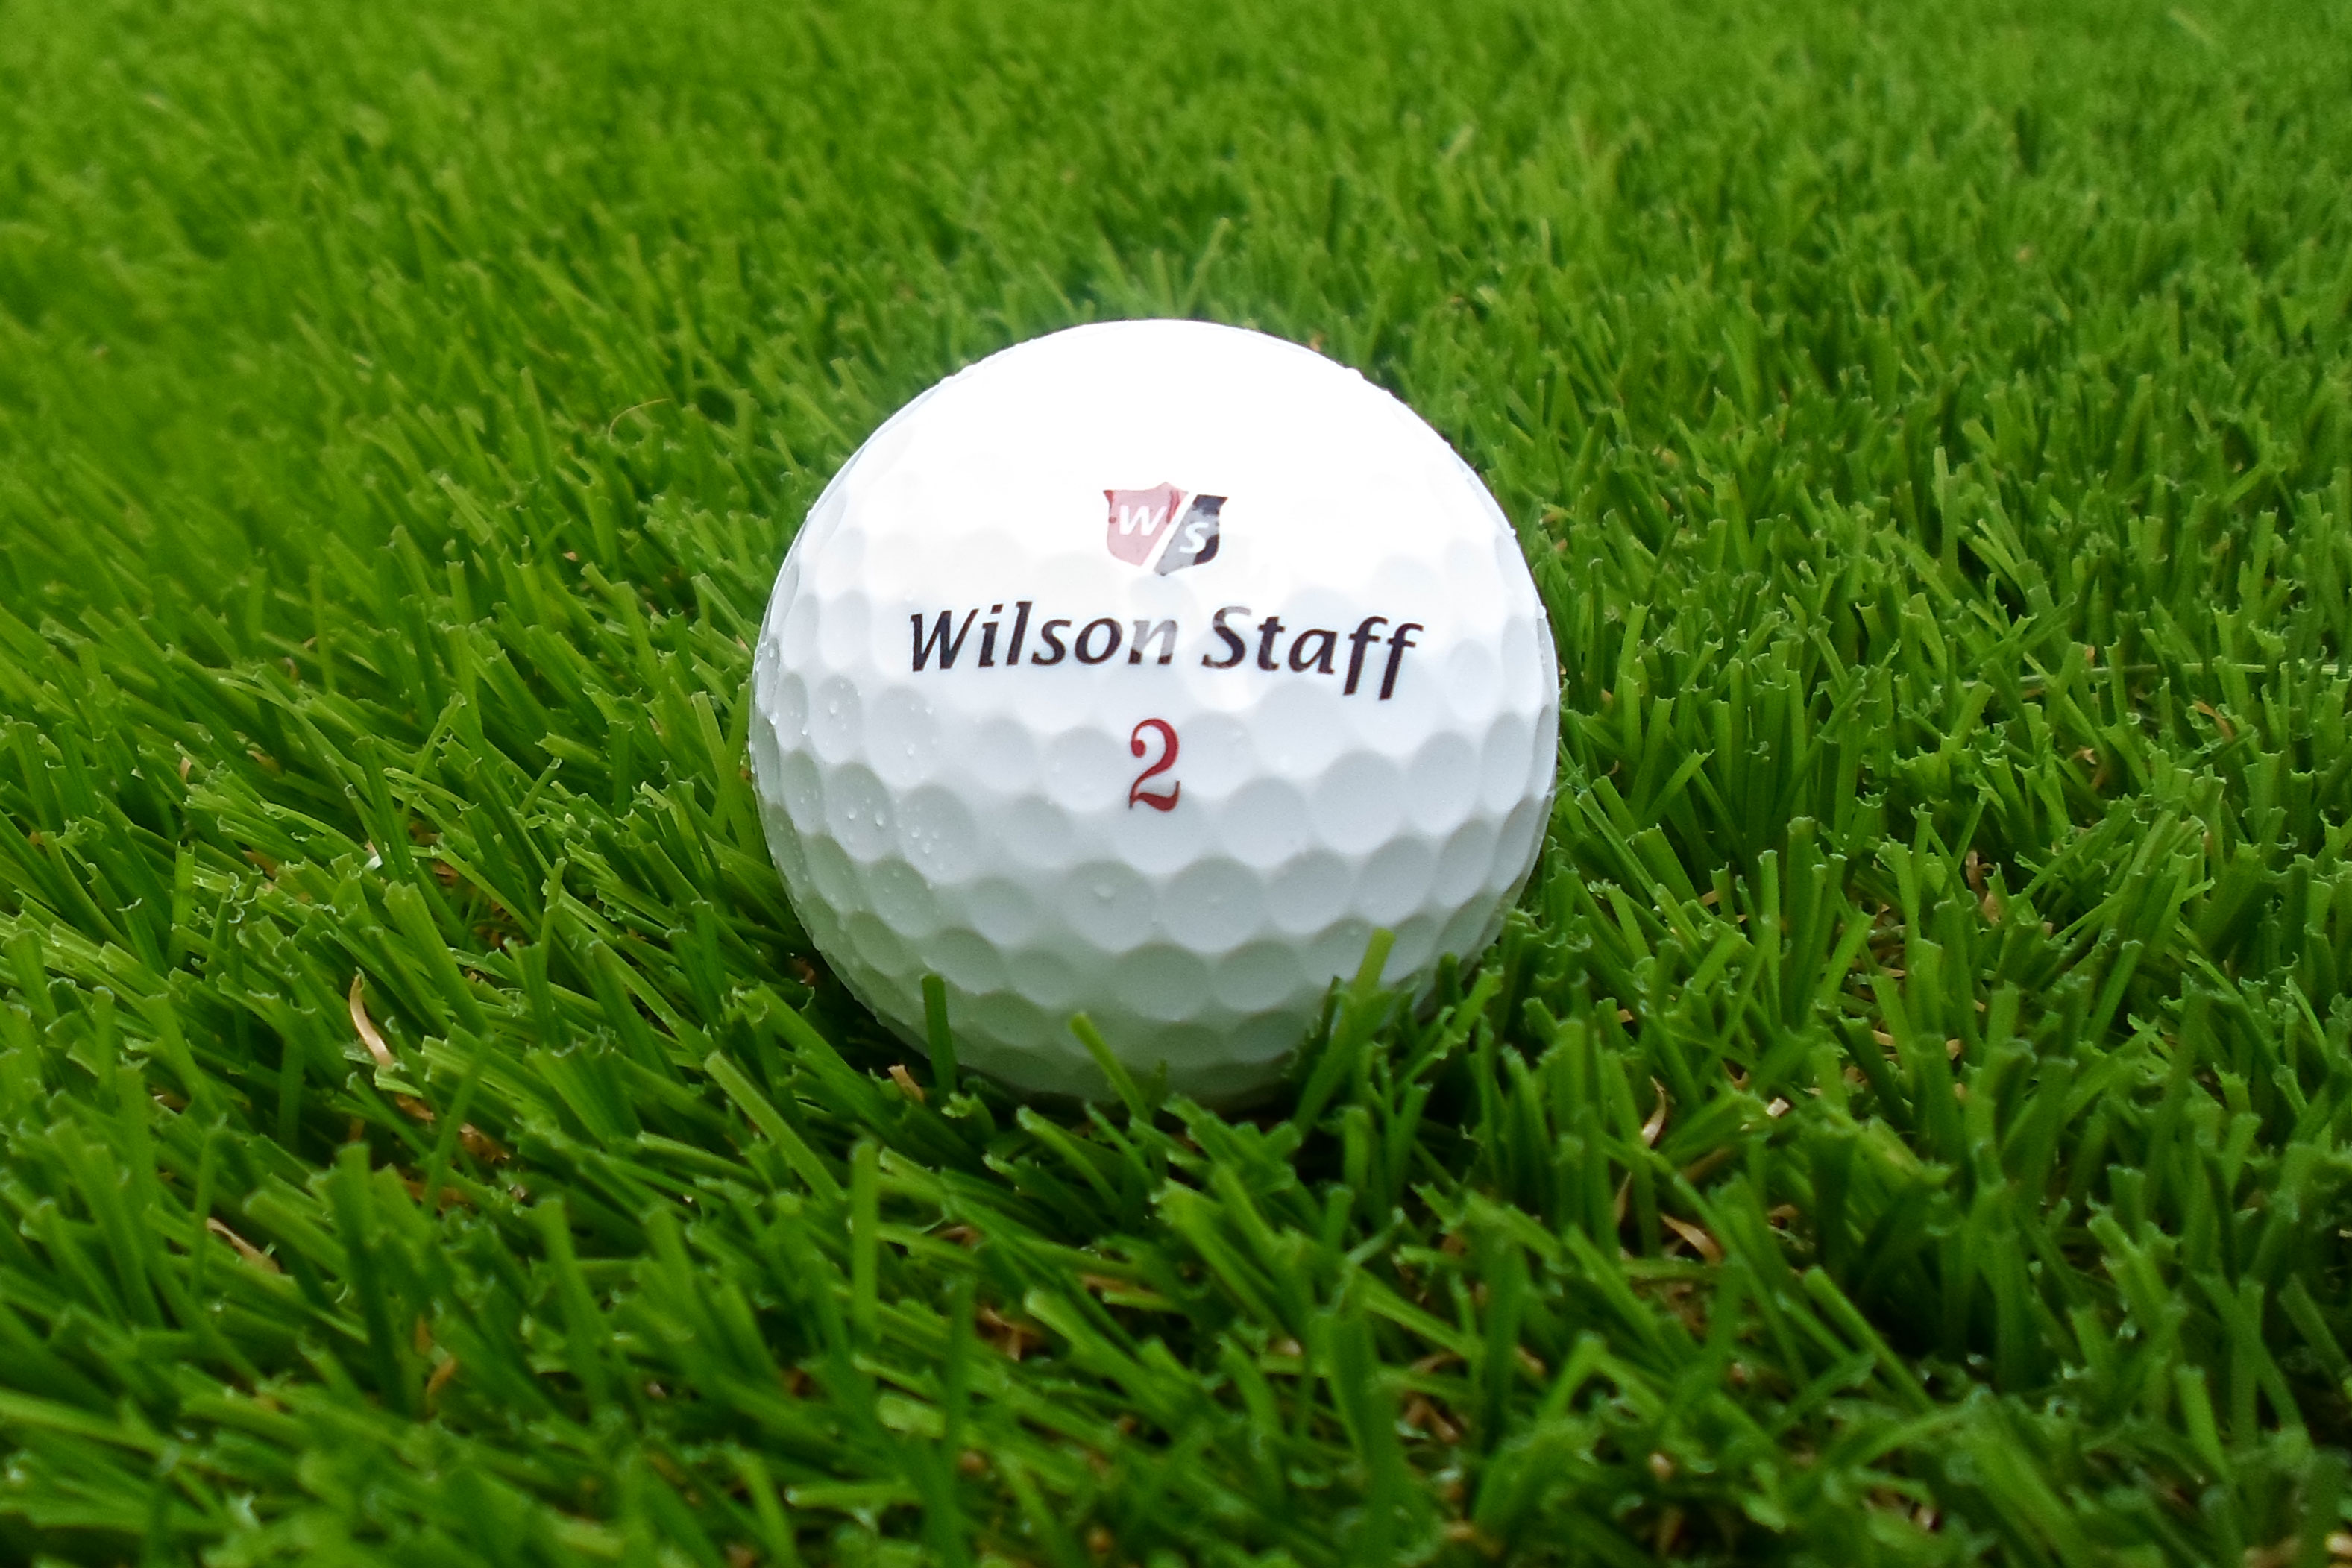 Review: Wilson Staff DX2 Soft